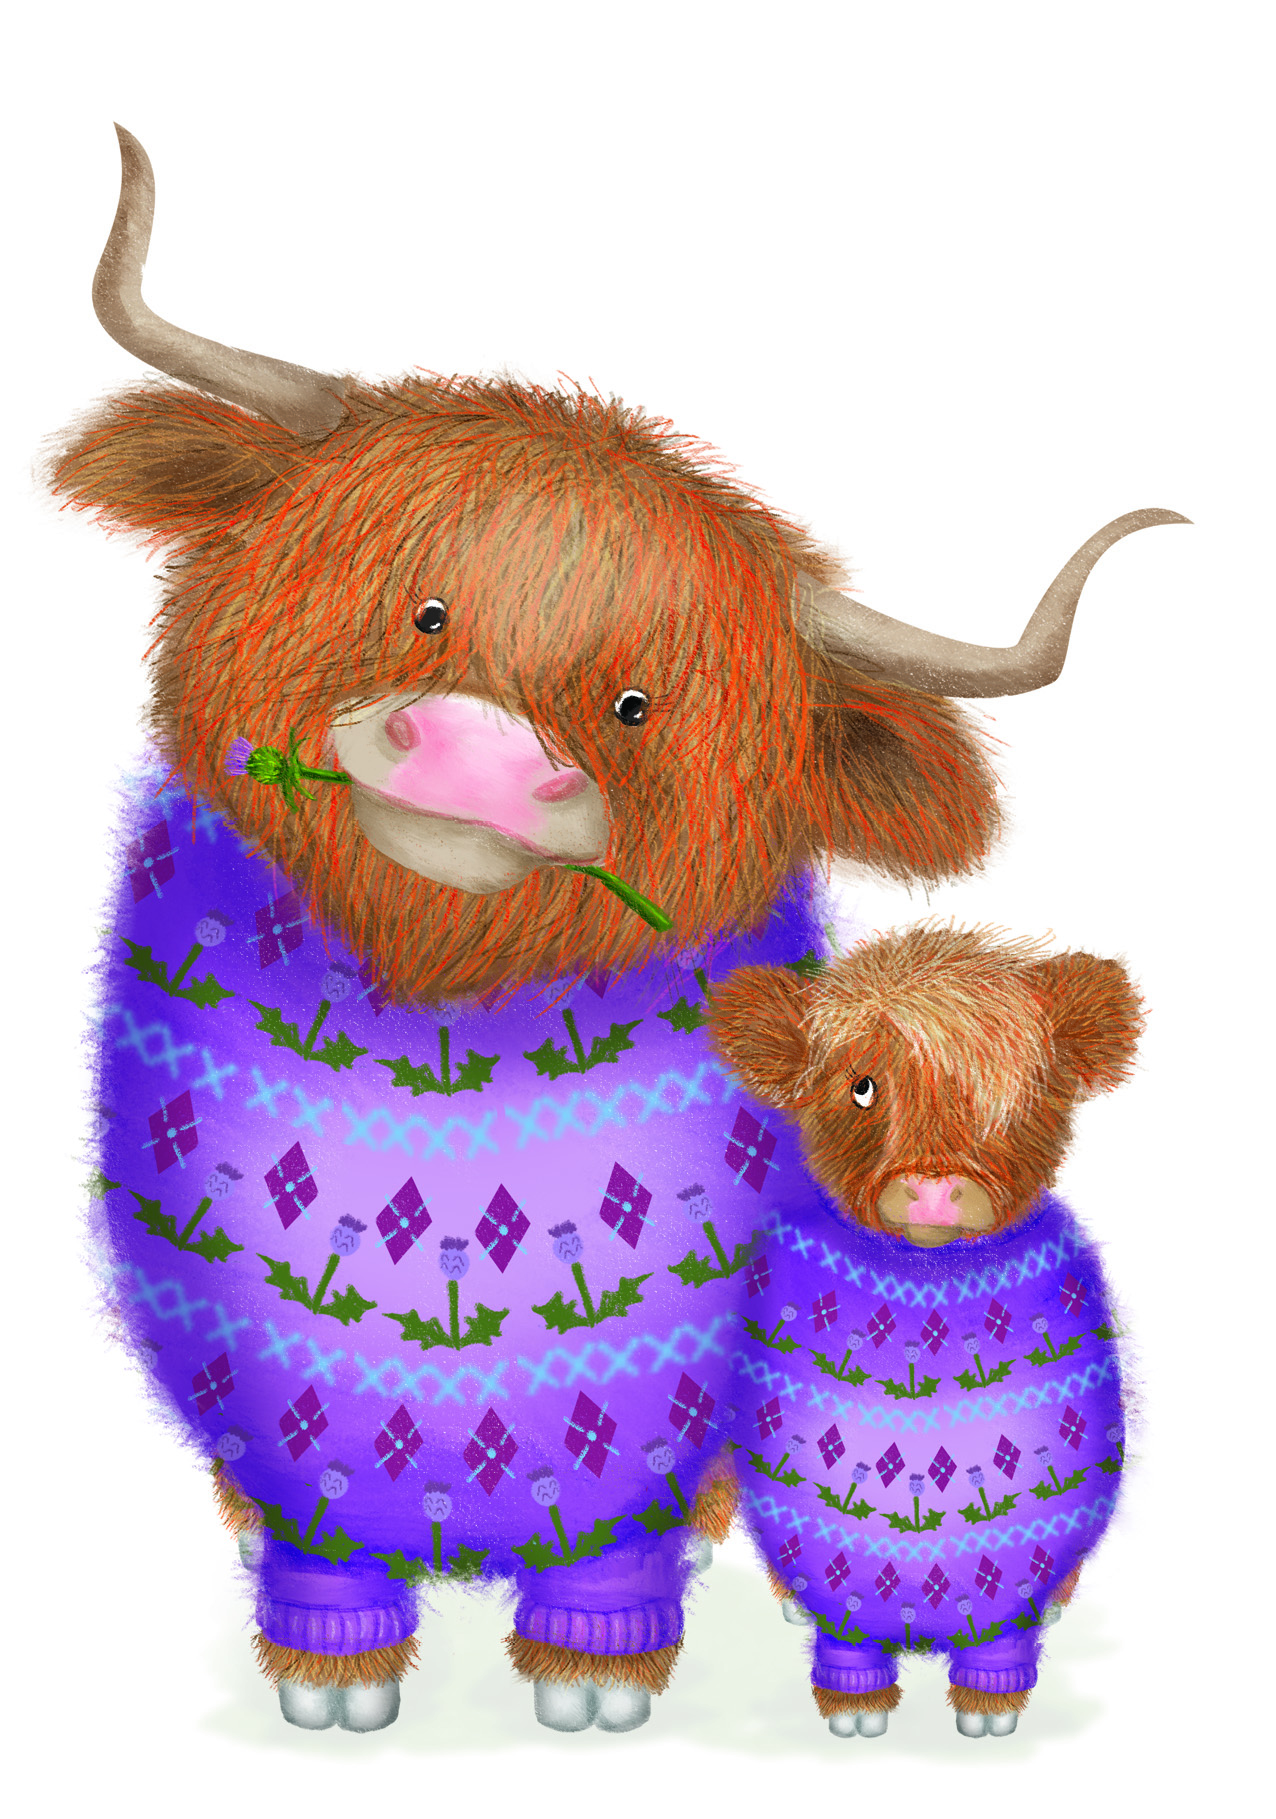 Highland coo and calf wearing purple knitted jumpers